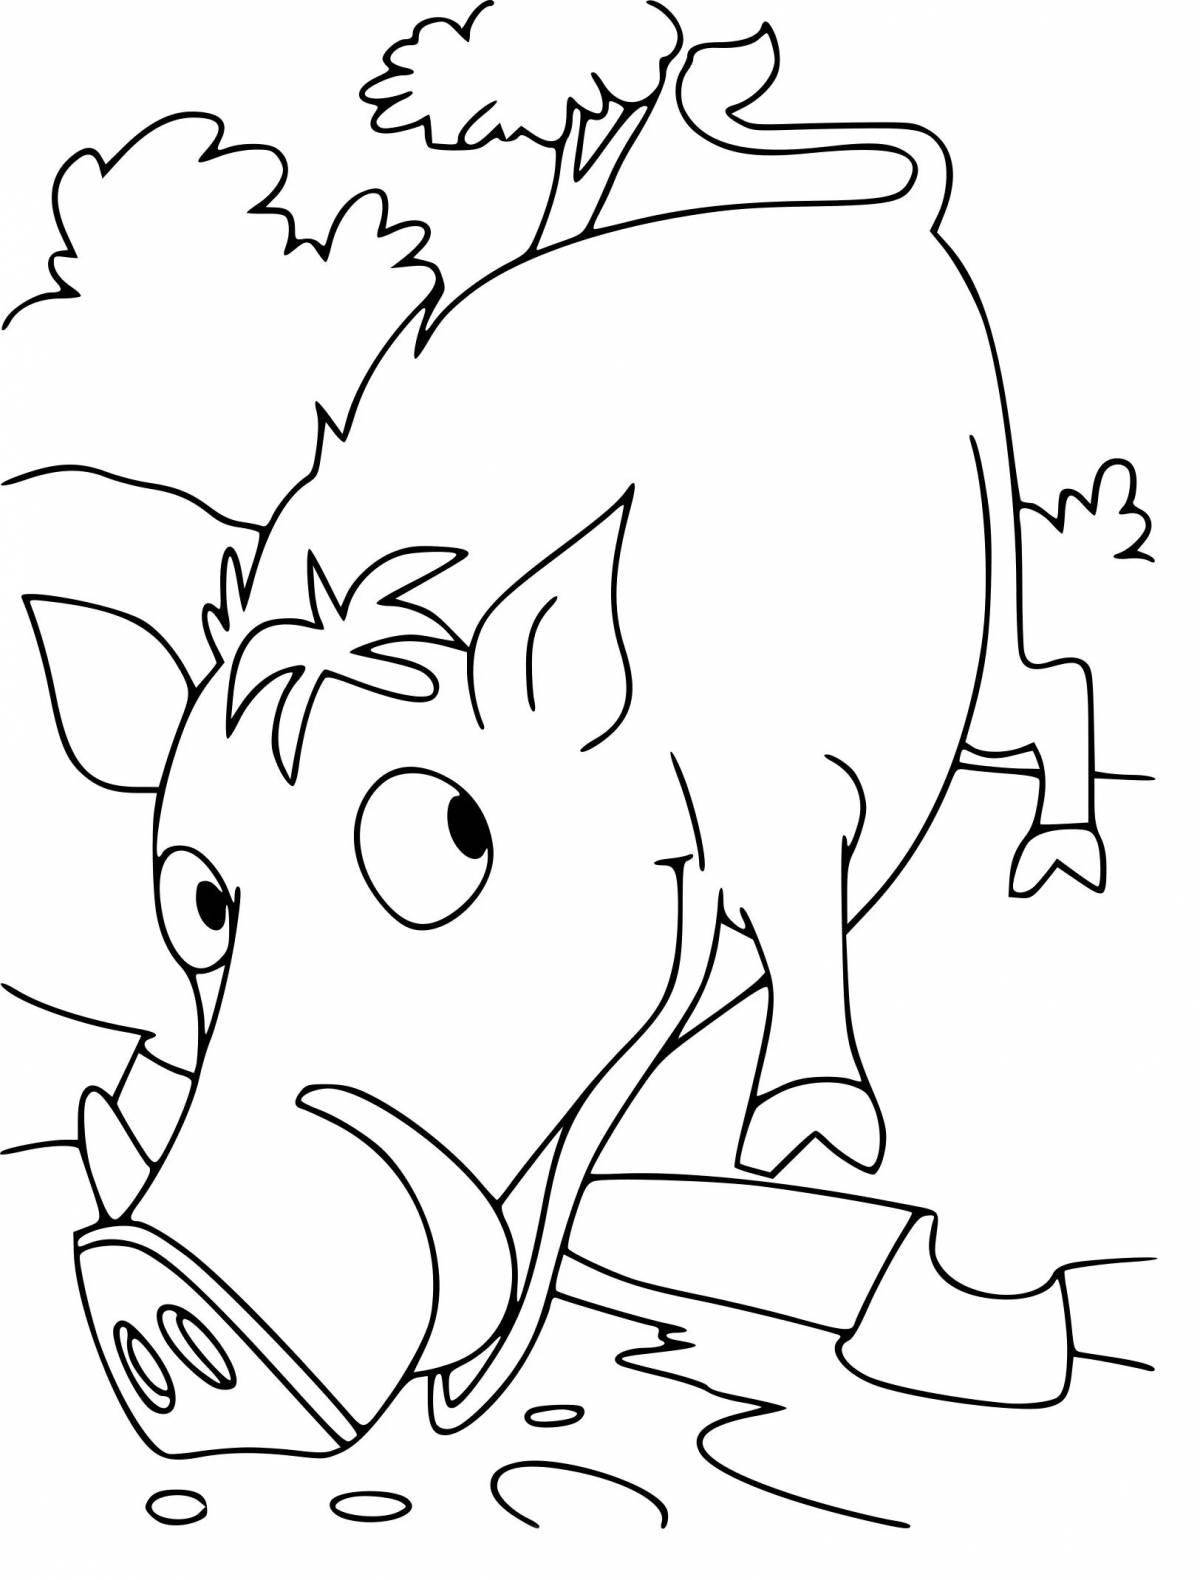 Coloring page happy boar for kids